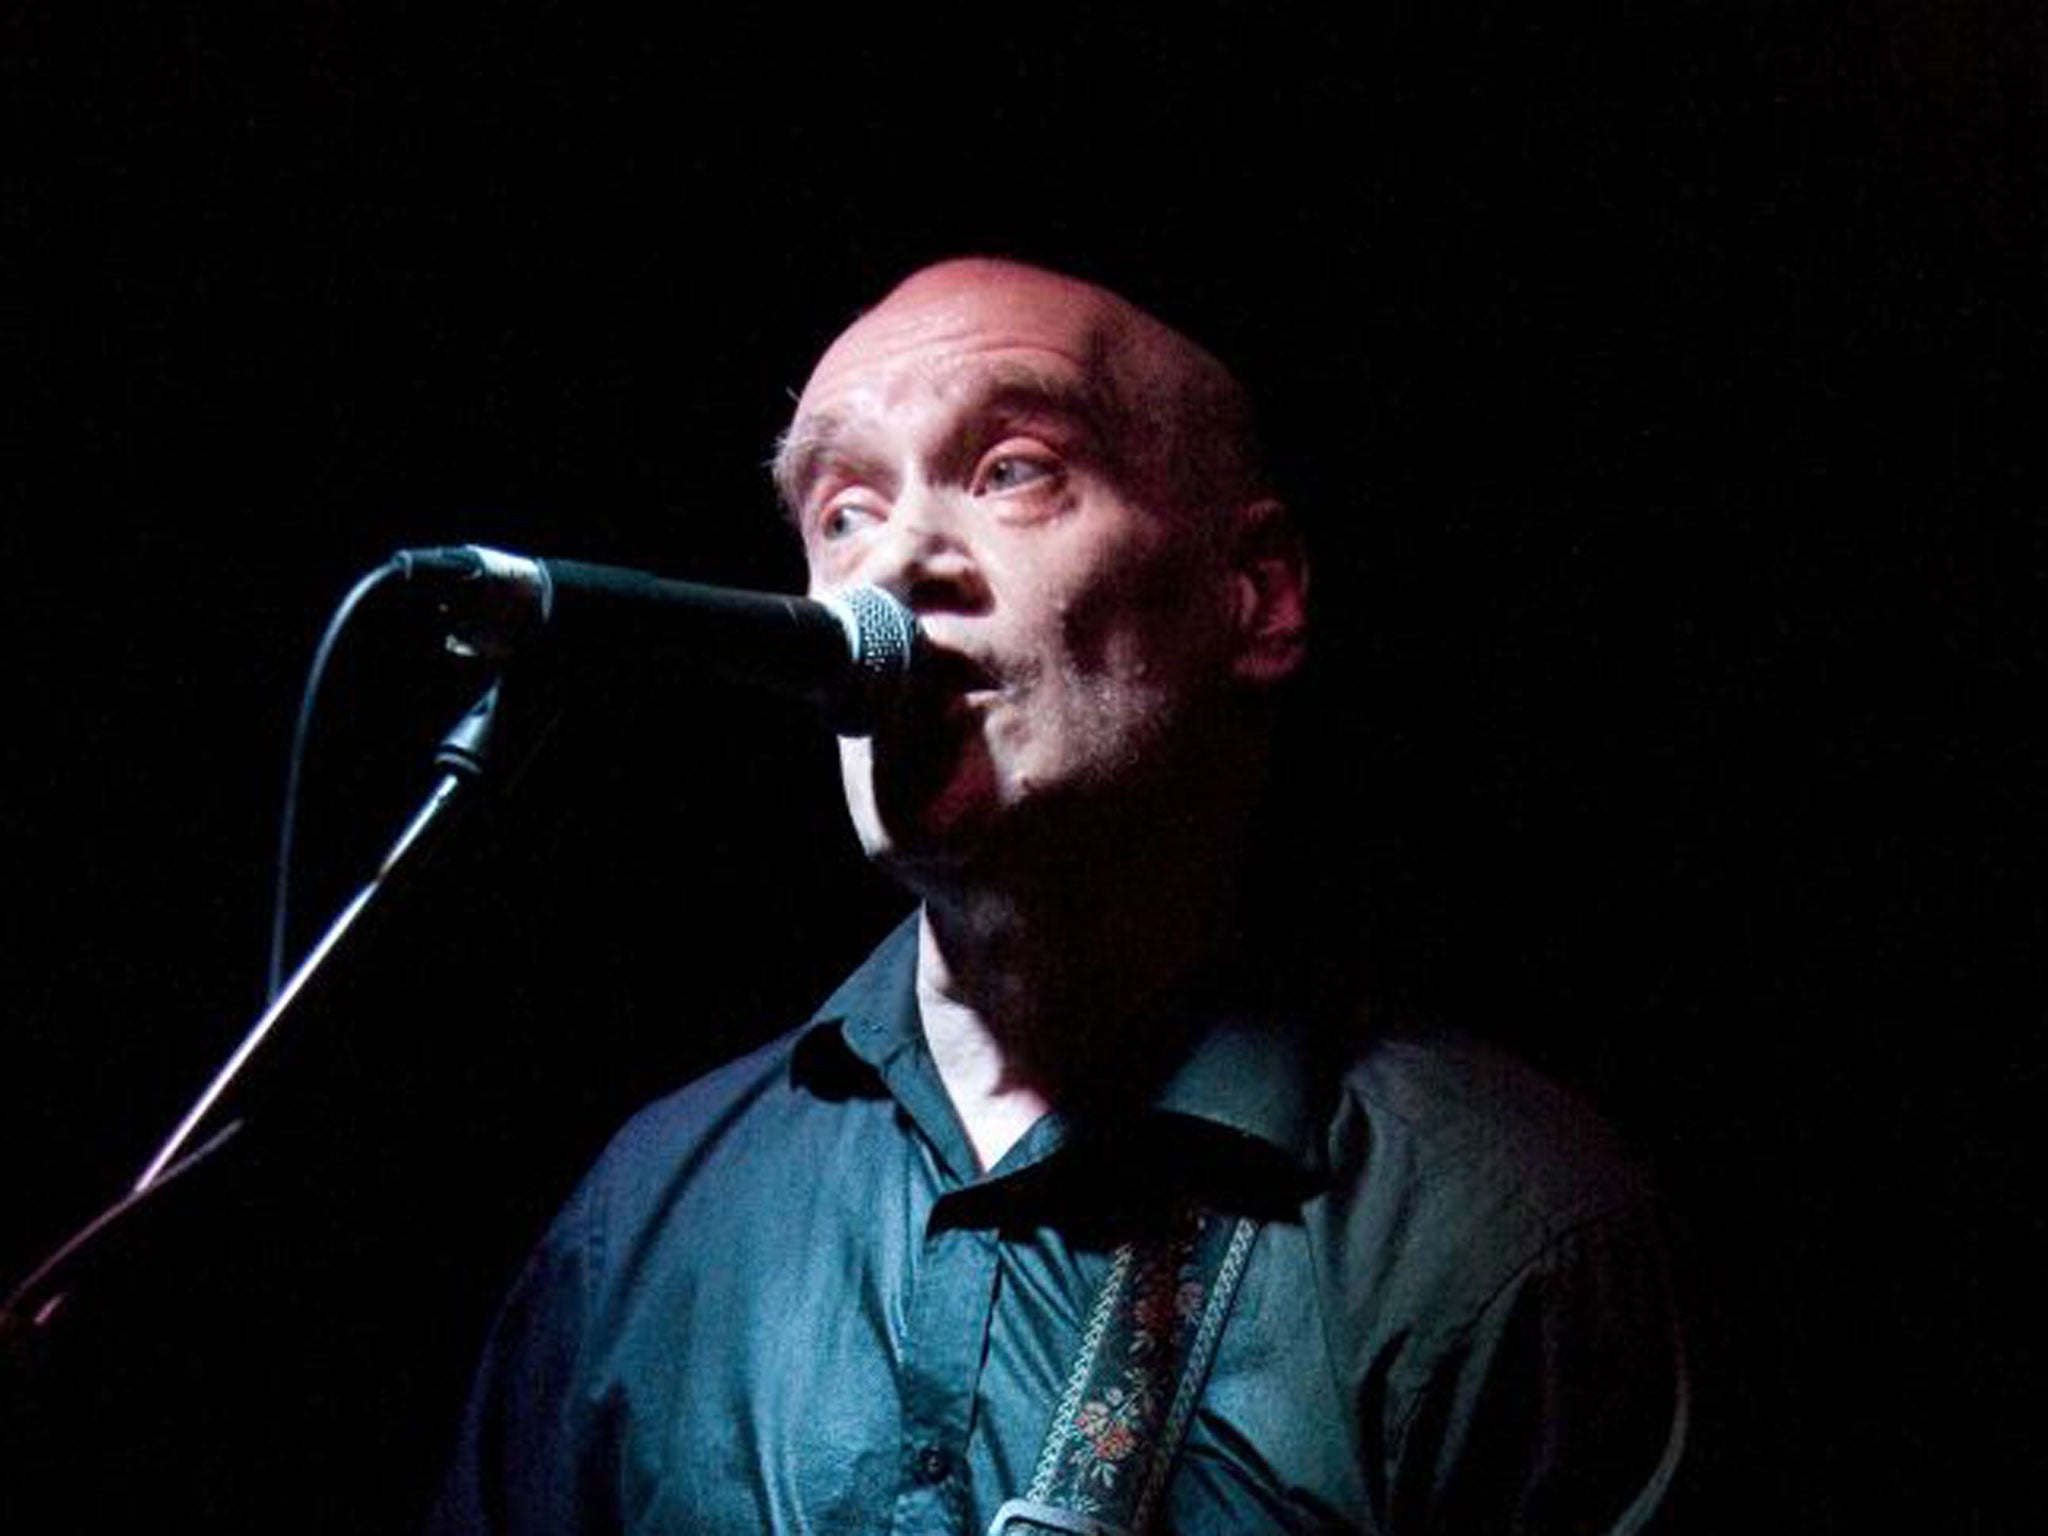 Wilko, above, and Dr Feelgood put the rhythm back into R’n’B